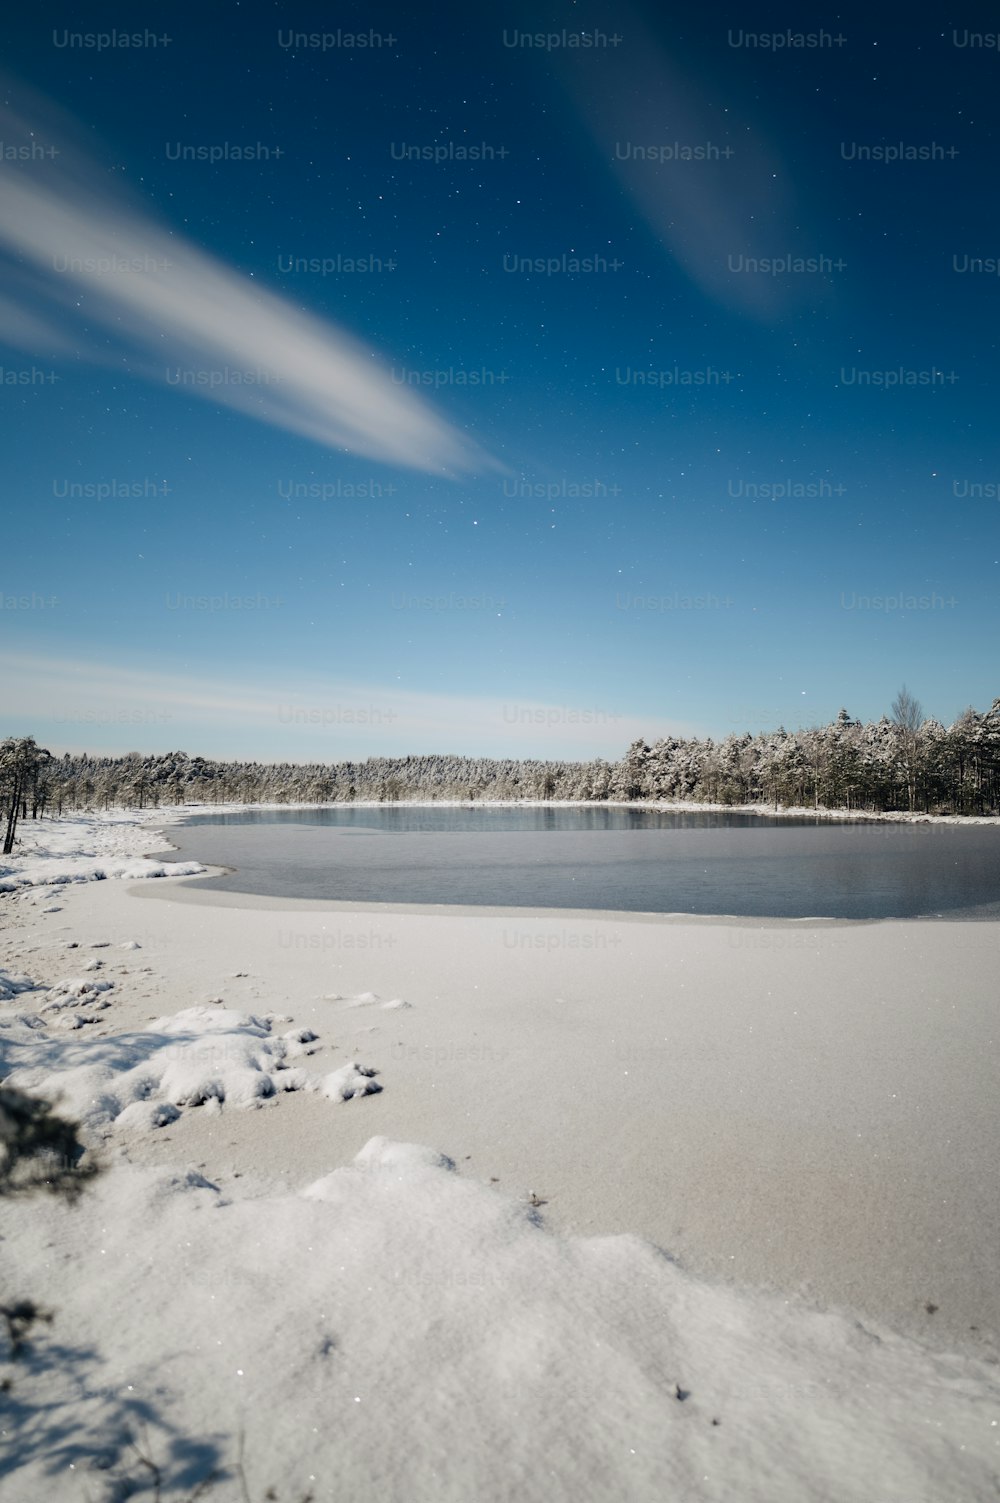 a lake surrounded by snow and trees under a blue sky